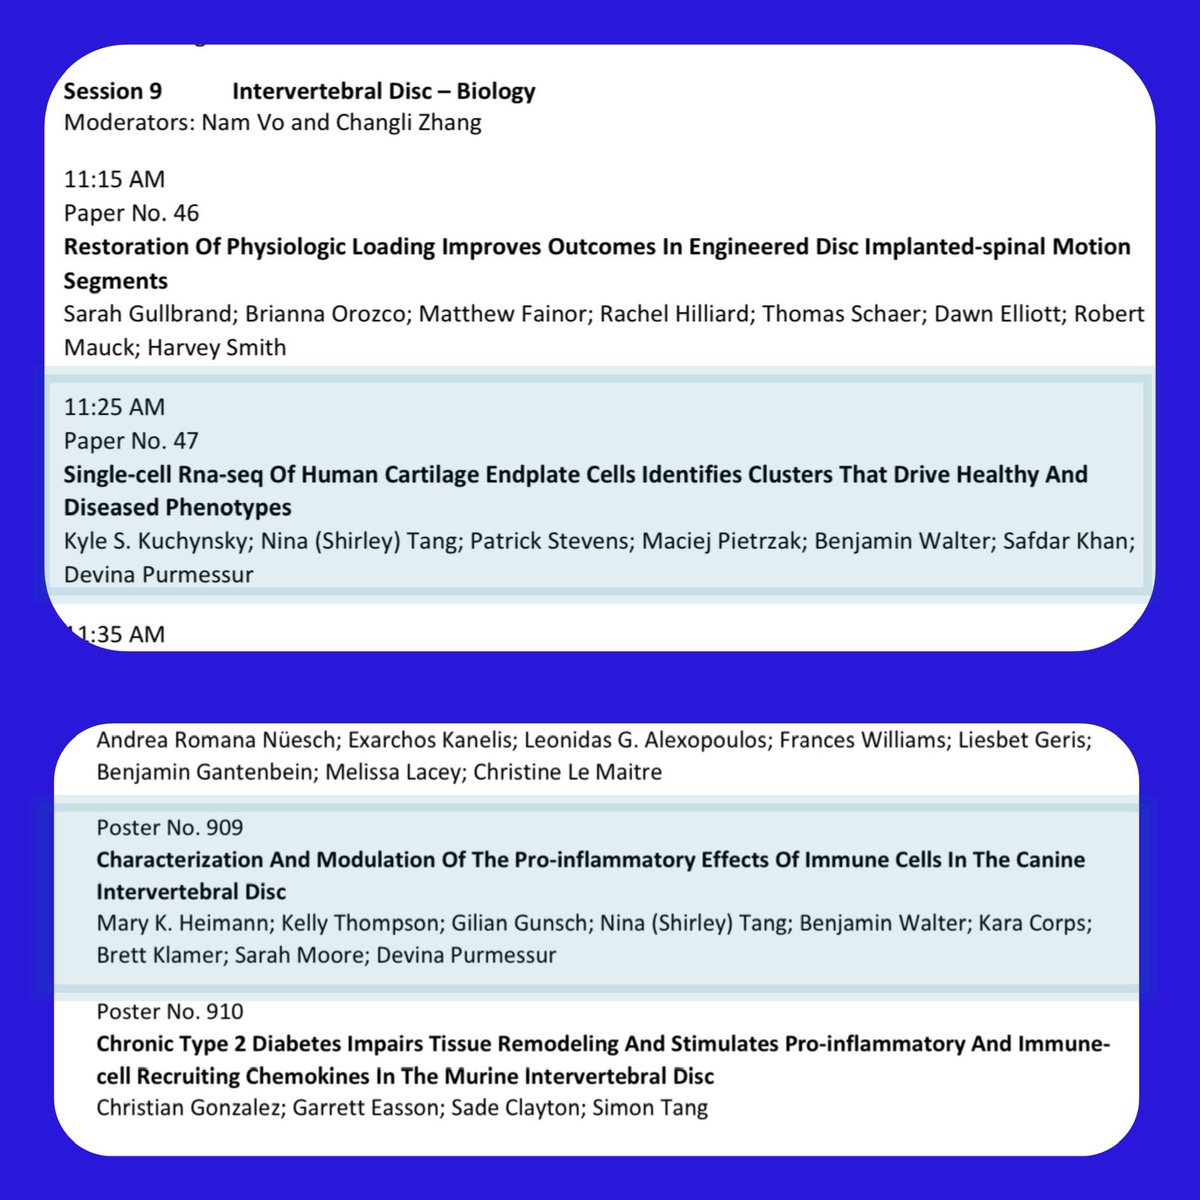 Check out Podium No.47 and Poster 909 at #ORS2023 to learn about #scrnaseq of the human cartilage endplate and #mastcells in the #IVD 

@DevinaPurmessur @Kuchynskynator @SafdarKhanMD @WalterSpineLab @docsmooresie